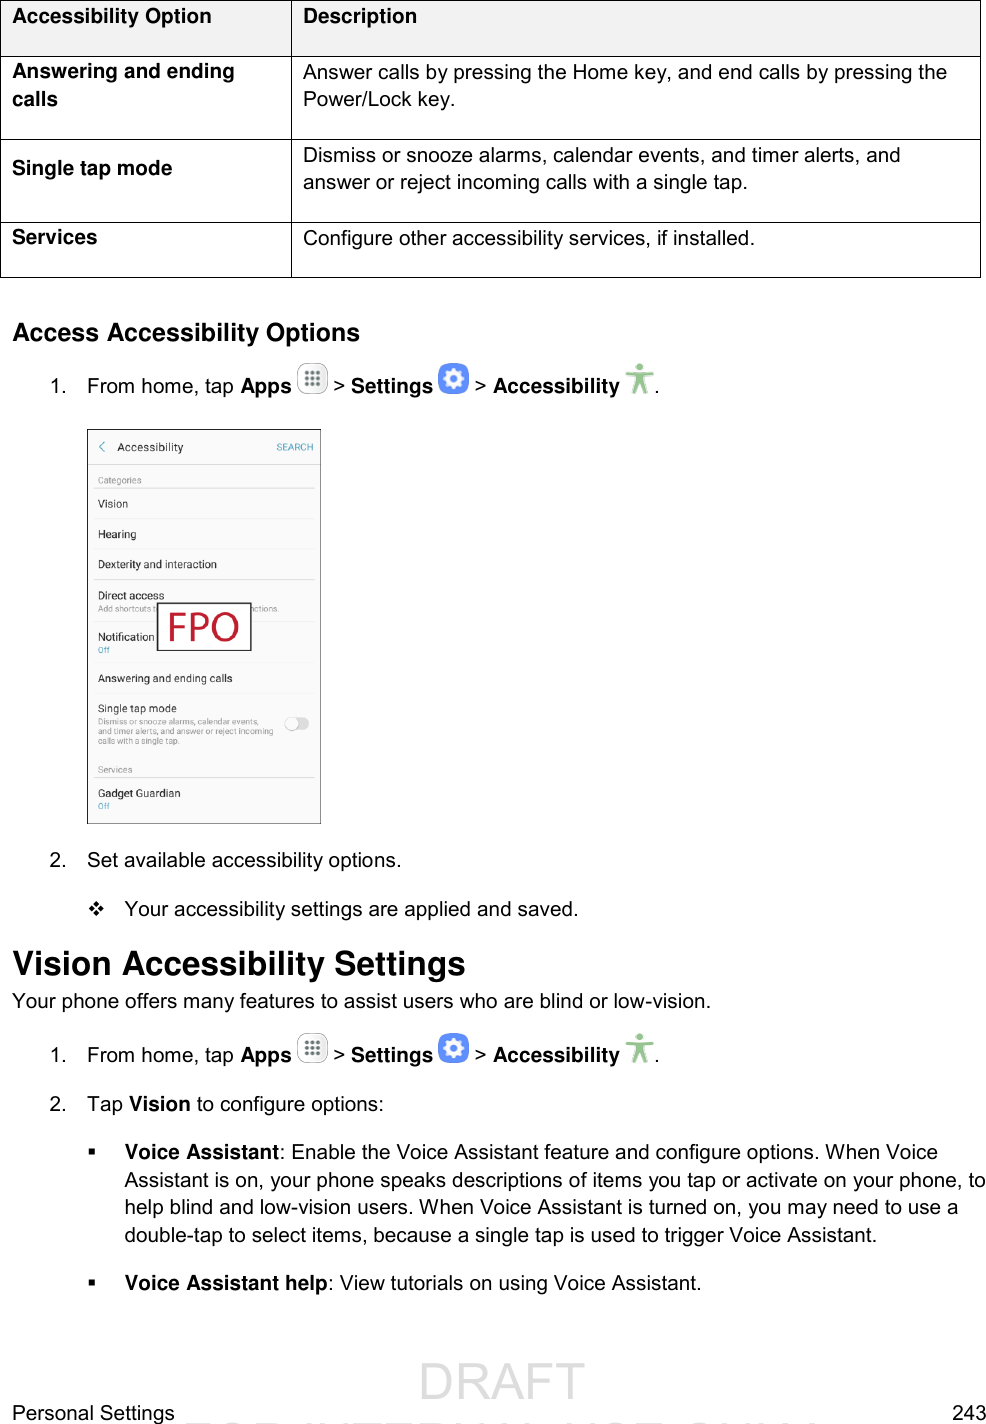                  DRAFT FOR INTERNAL USE ONLYPersonal Settings  243 Accessibility Option Description Answering and ending calls Answer calls by pressing the Home key, and end calls by pressing the Power/Lock key. Single tap mode Dismiss or snooze alarms, calendar events, and timer alerts, and answer or reject incoming calls with a single tap. Services Configure other accessibility services, if installed.  Access Accessibility Options 1.  From home, tap Apps   &gt; Settings   &gt; Accessibility  .   2.  Set available accessibility options.   Your accessibility settings are applied and saved. Vision Accessibility Settings Your phone offers many features to assist users who are blind or low-vision. 1.  From home, tap Apps   &gt; Settings   &gt; Accessibility  . 2.  Tap Vision to configure options:   Voice Assistant: Enable the Voice Assistant feature and configure options. When Voice Assistant is on, your phone speaks descriptions of items you tap or activate on your phone, to help blind and low-vision users. When Voice Assistant is turned on, you may need to use a double-tap to select items, because a single tap is used to trigger Voice Assistant.   Voice Assistant help: View tutorials on using Voice Assistant.  